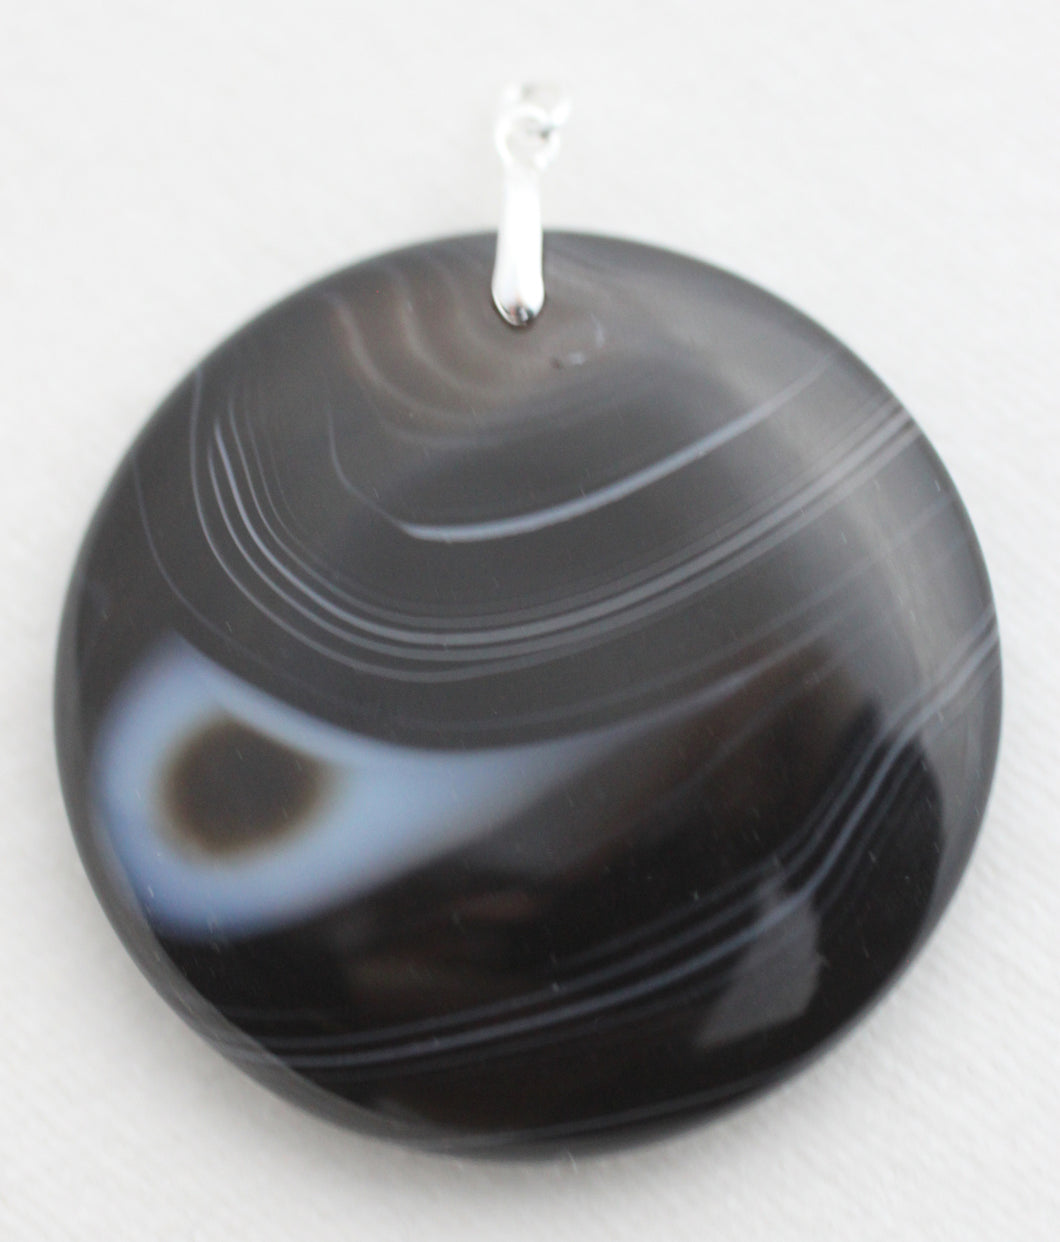 Black Agate Pendant that is Super-Silky and Glassy